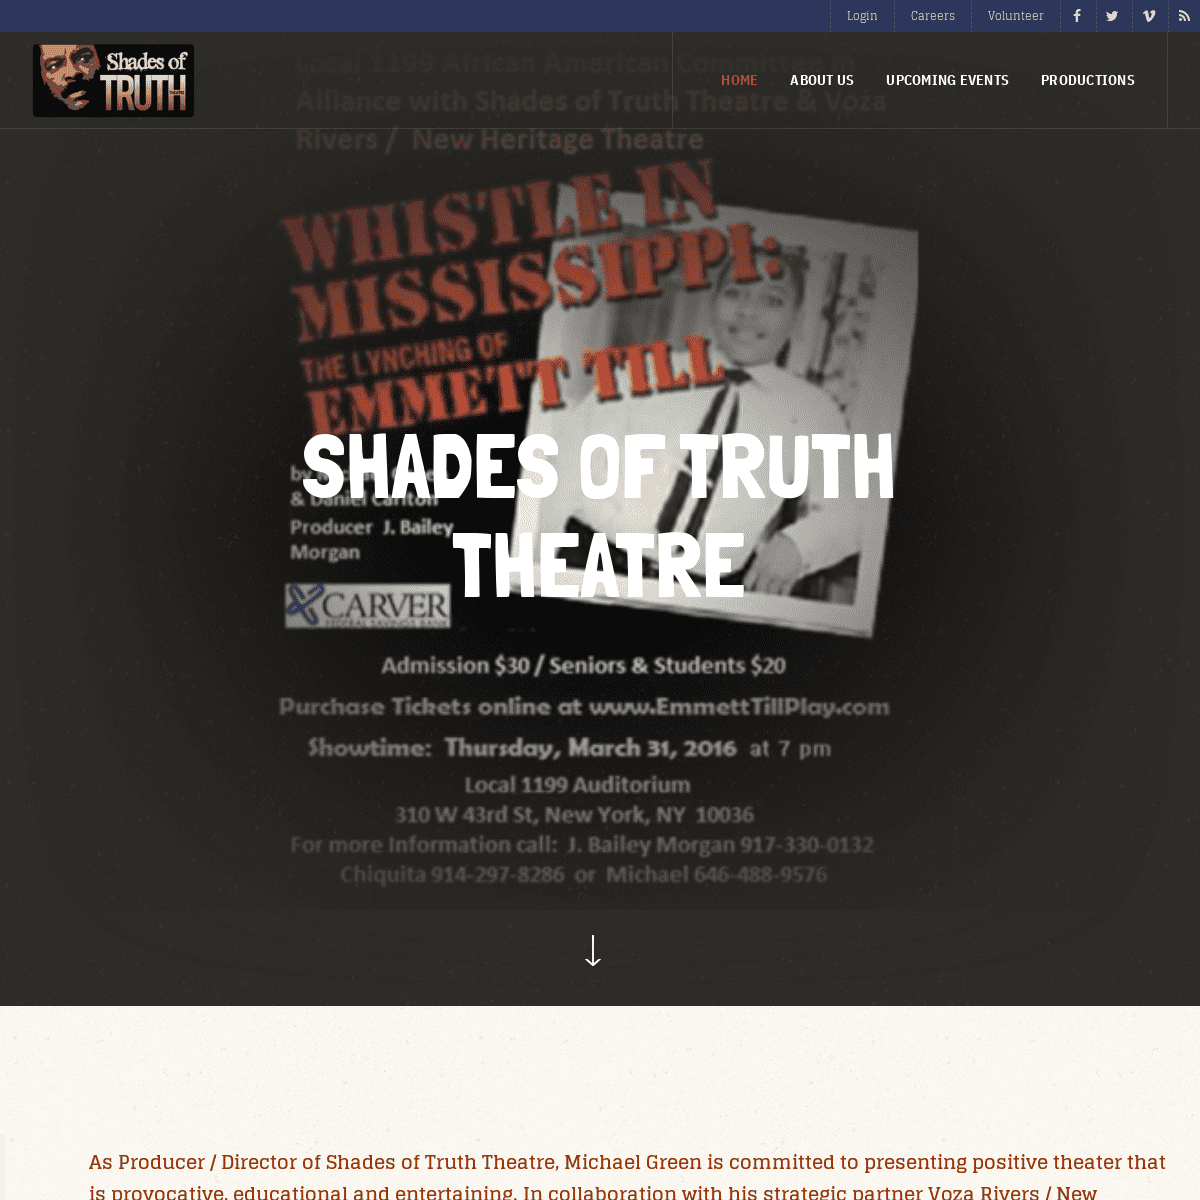 A complete backup of shadesoftruththeatre.com